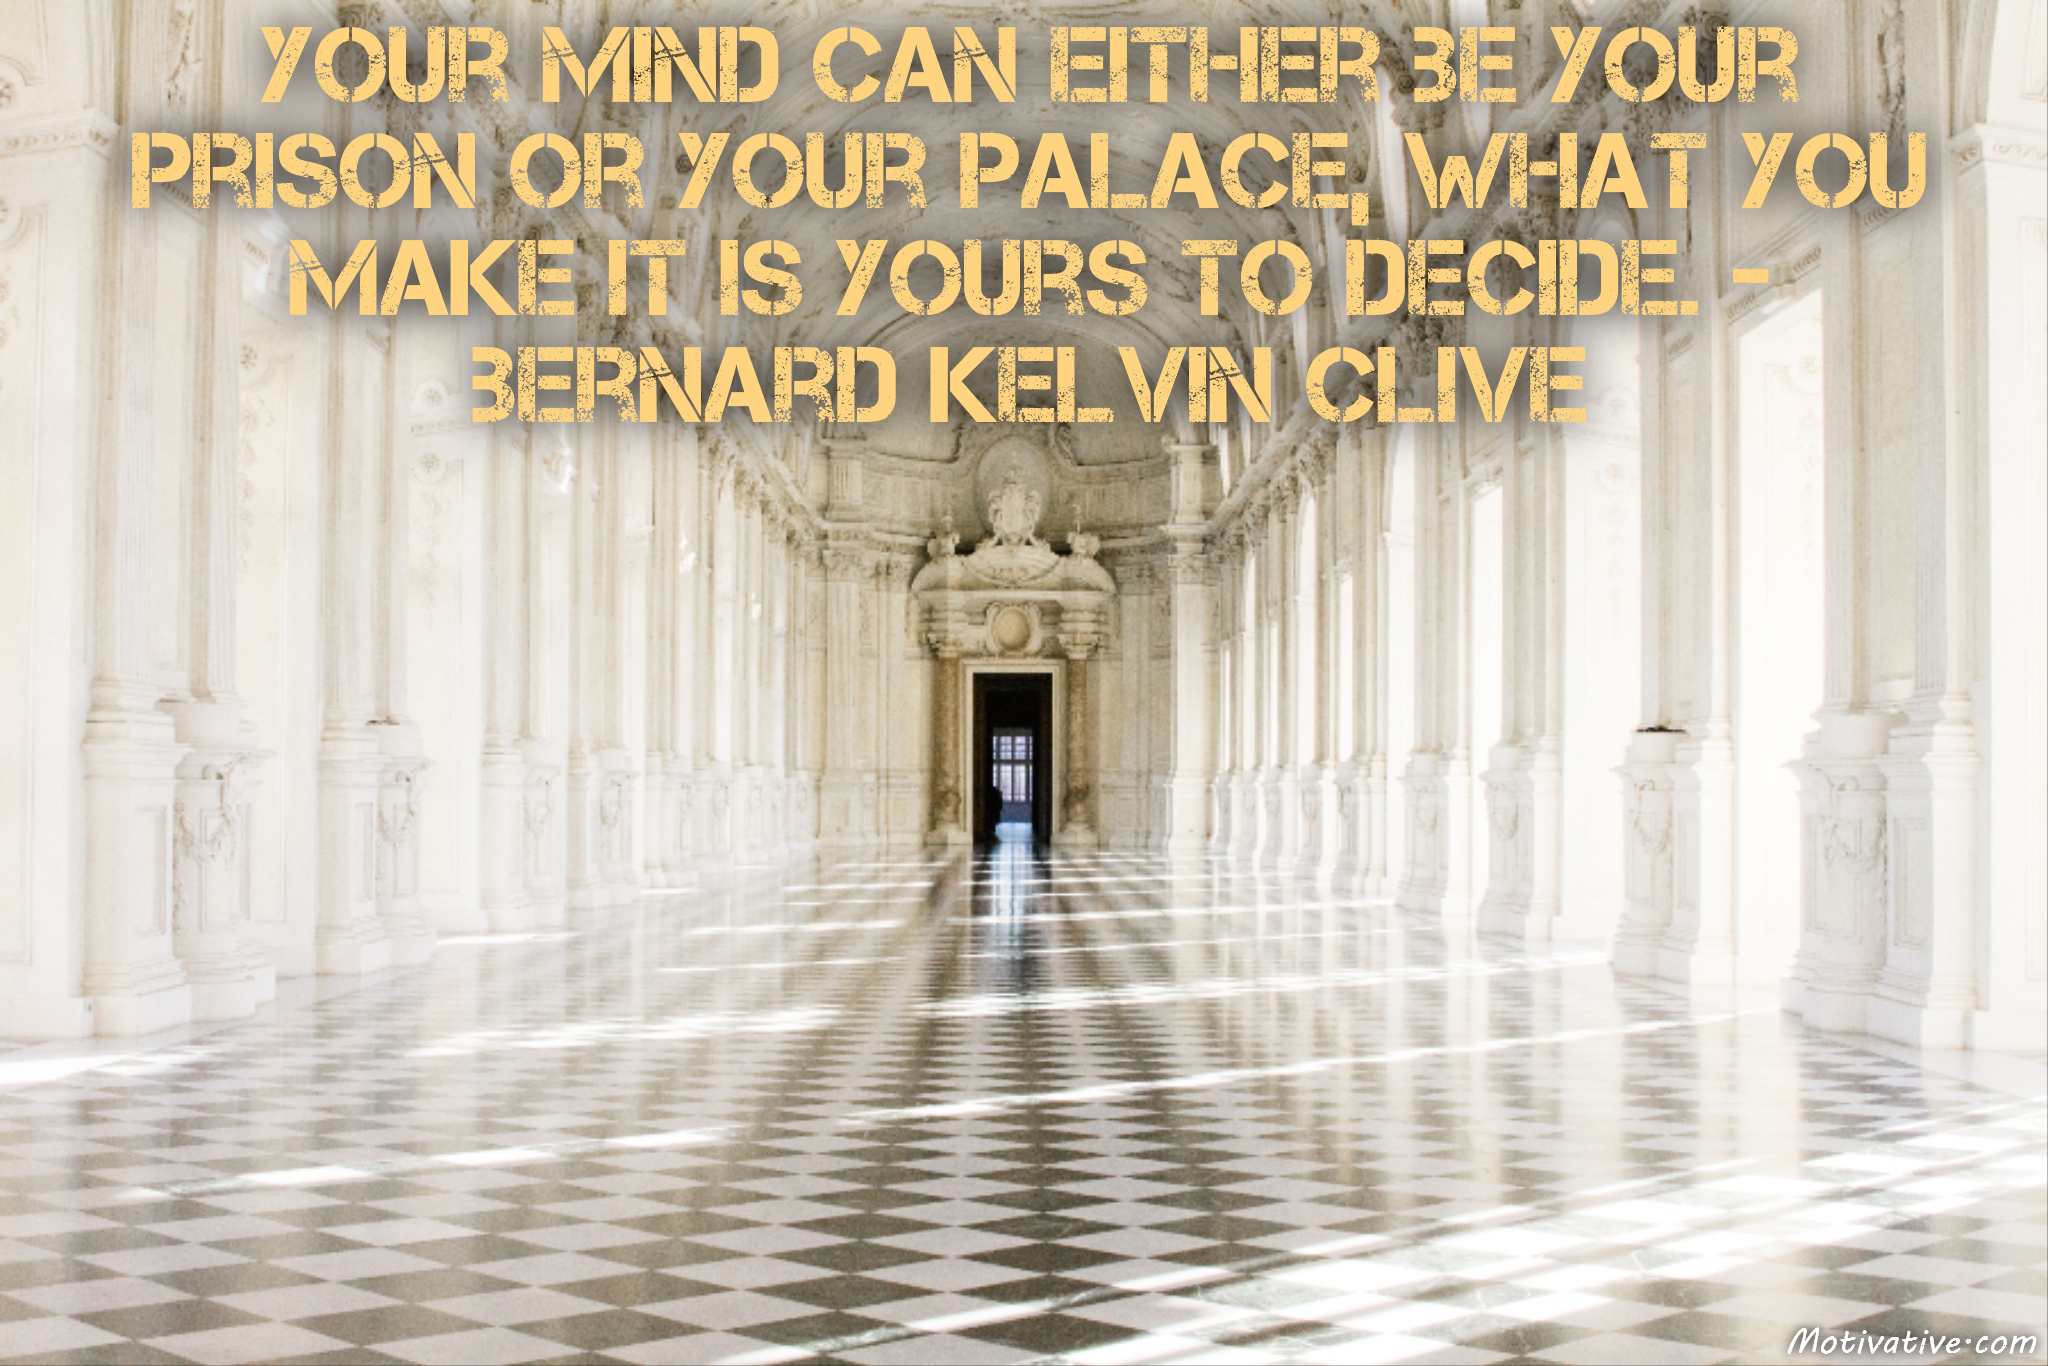 Your mind can either be your prison or your palace, what you make it is yours to decide. – Bernard Kelvin Clive